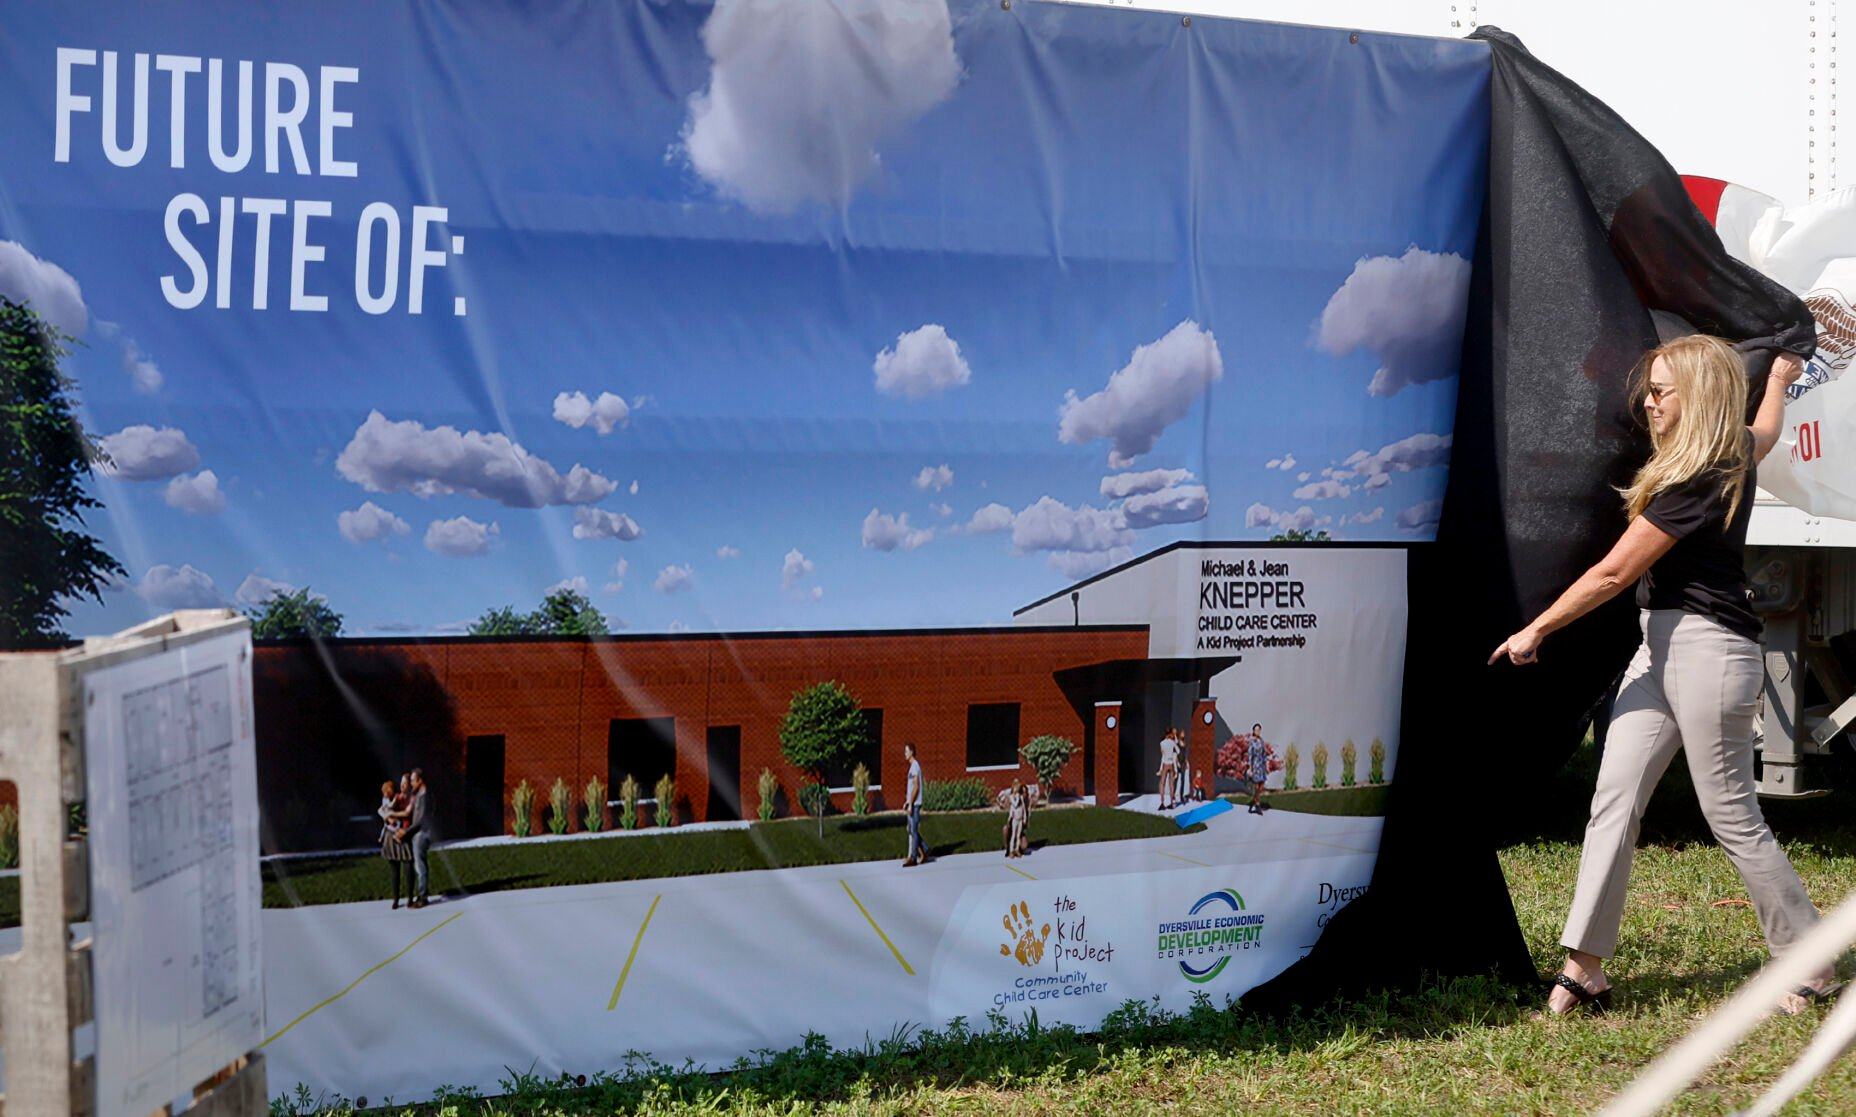 Dyersville Economic Development Corp. Executive Director Jacque Rahe unveils a banner on Thursday during a press conference at the future site of Michael and Jean Knepper Child Care Center in Dyersville, Iowa.    PHOTO CREDIT: JESSICA REILLY, Telegraph Herald